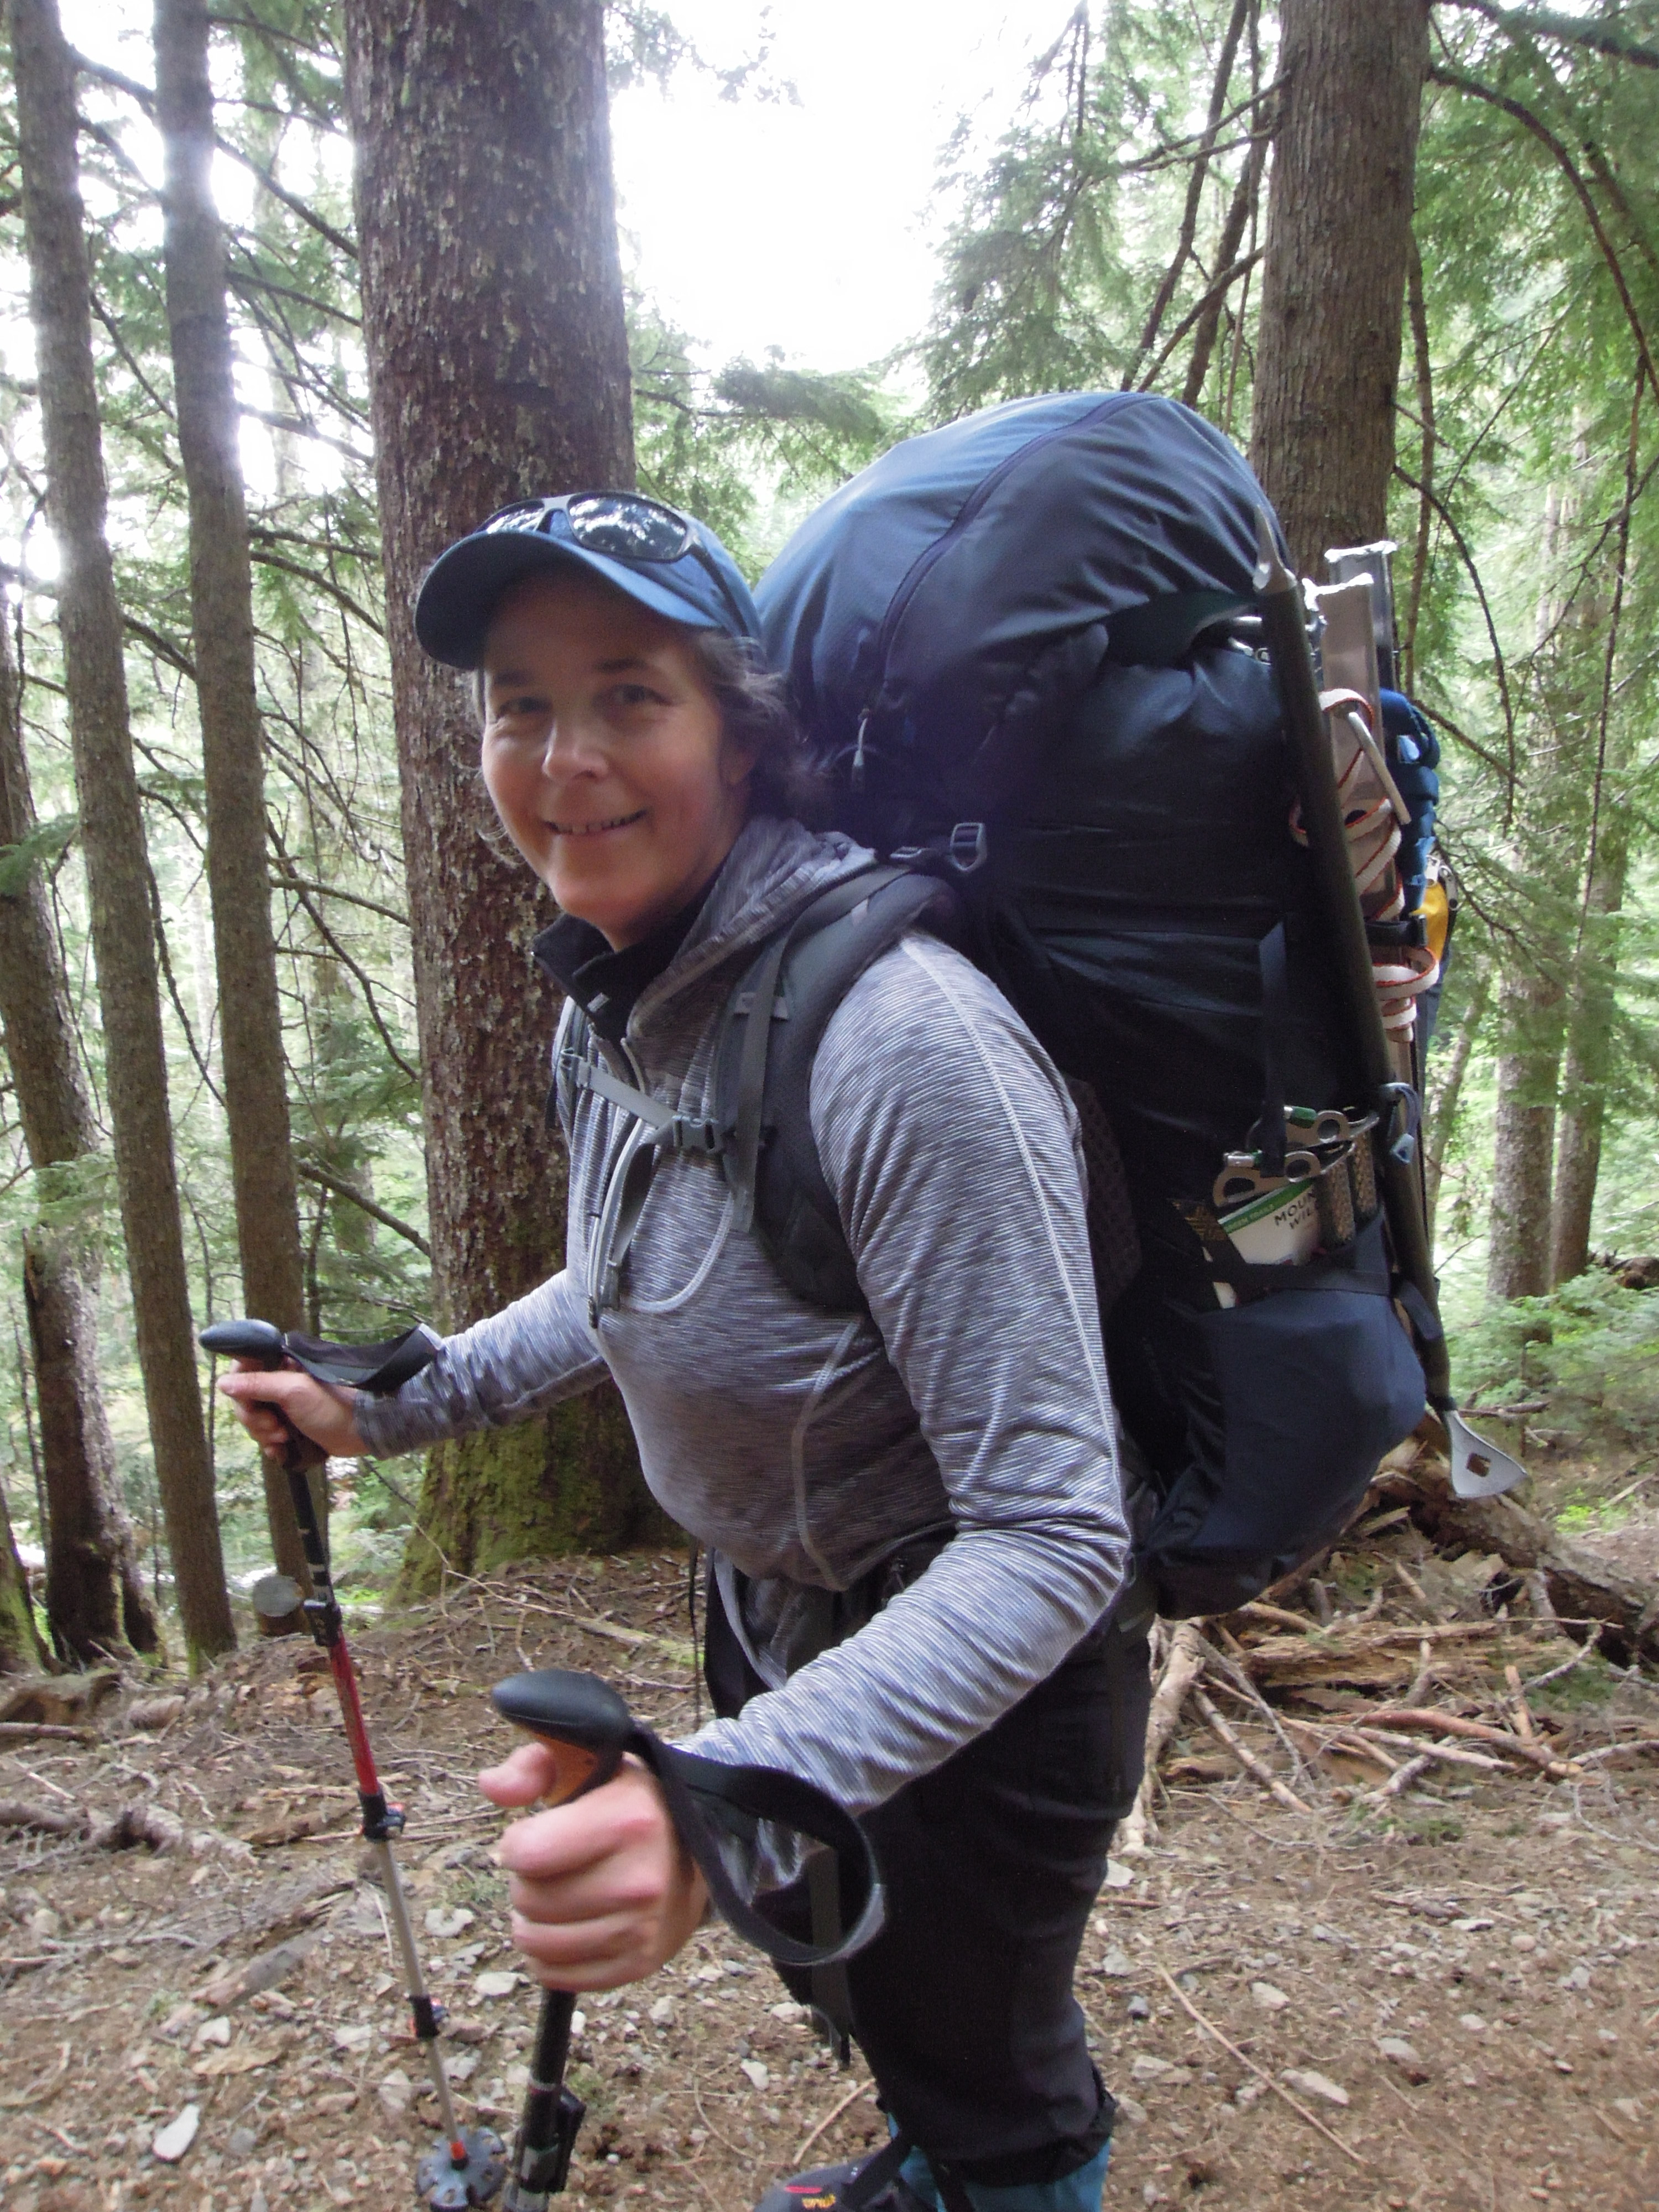 Annmarie hiking with a large backpack through a forest of tall conifers, wearing a baseball cap and smiling at the camera.